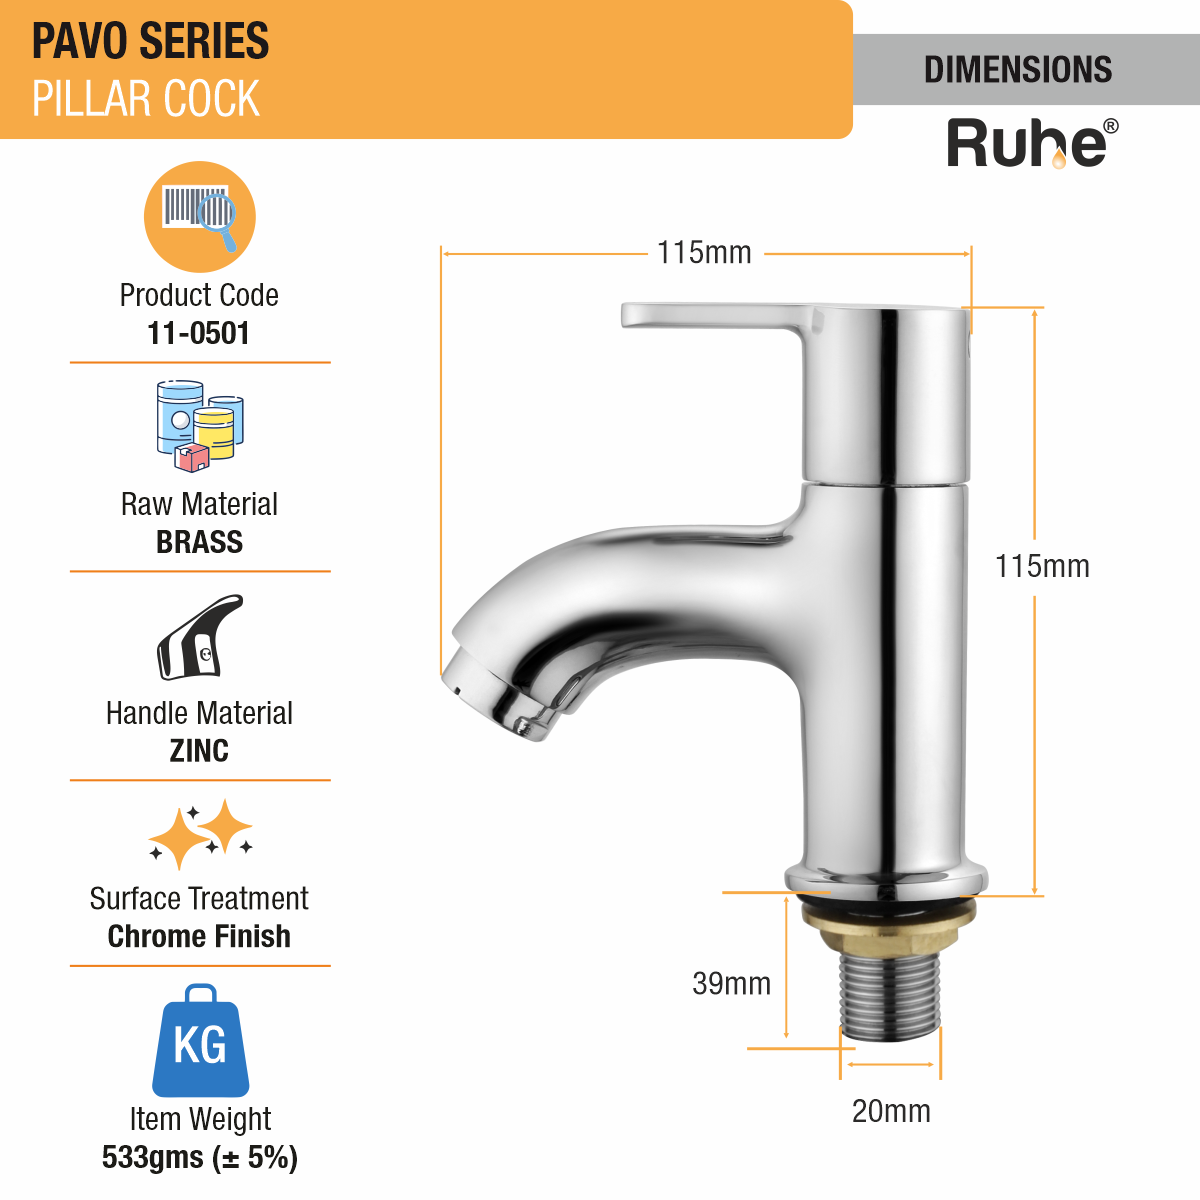 Pavo Pillar Tap Brass Faucet dimensions and size